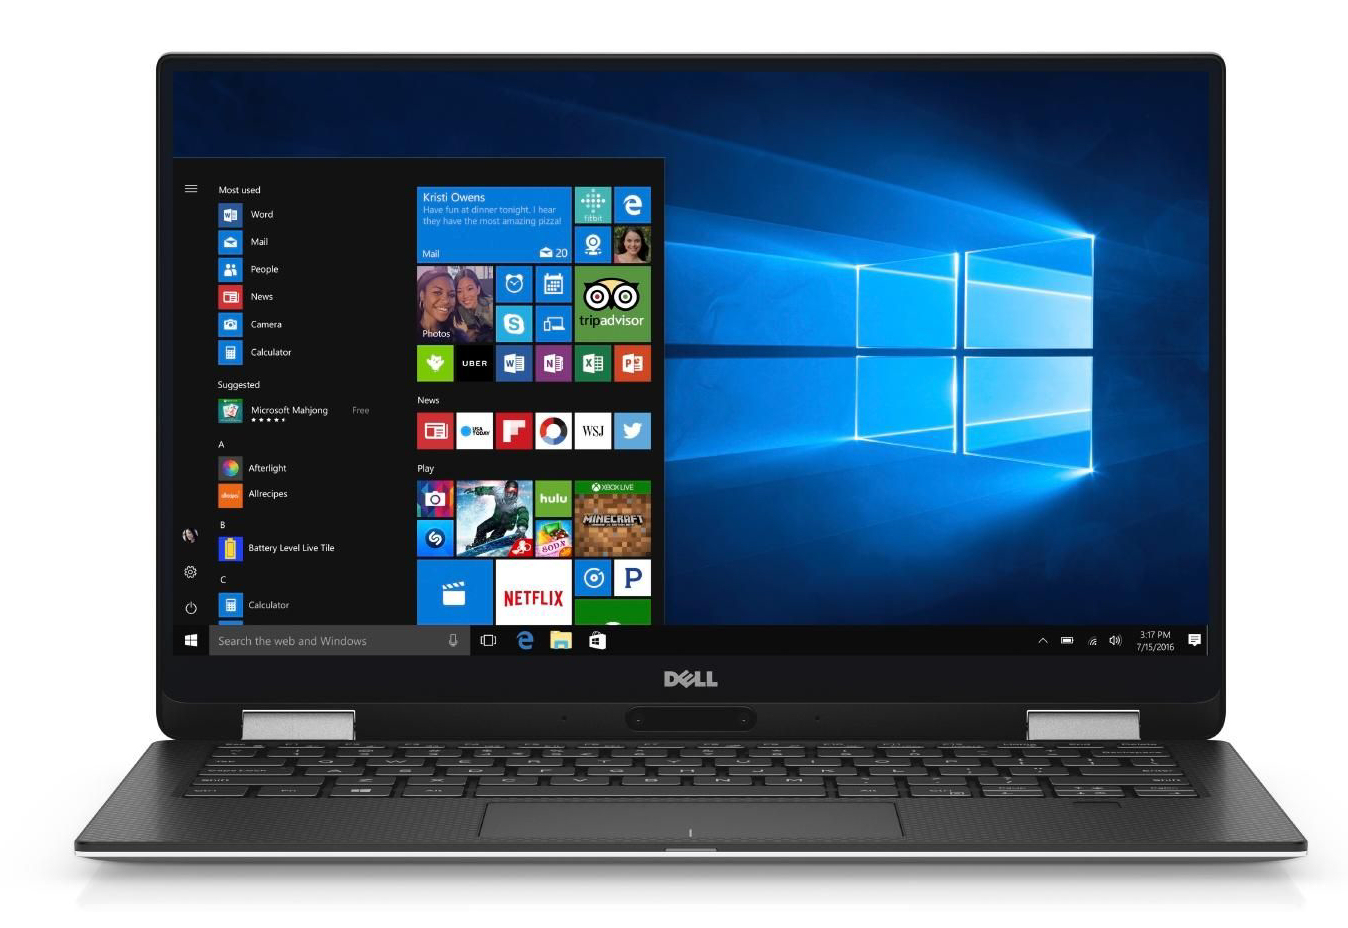 Dell Xps 13 9365 7y54 Qhd Convertible Review Notebookcheck Net Reviews